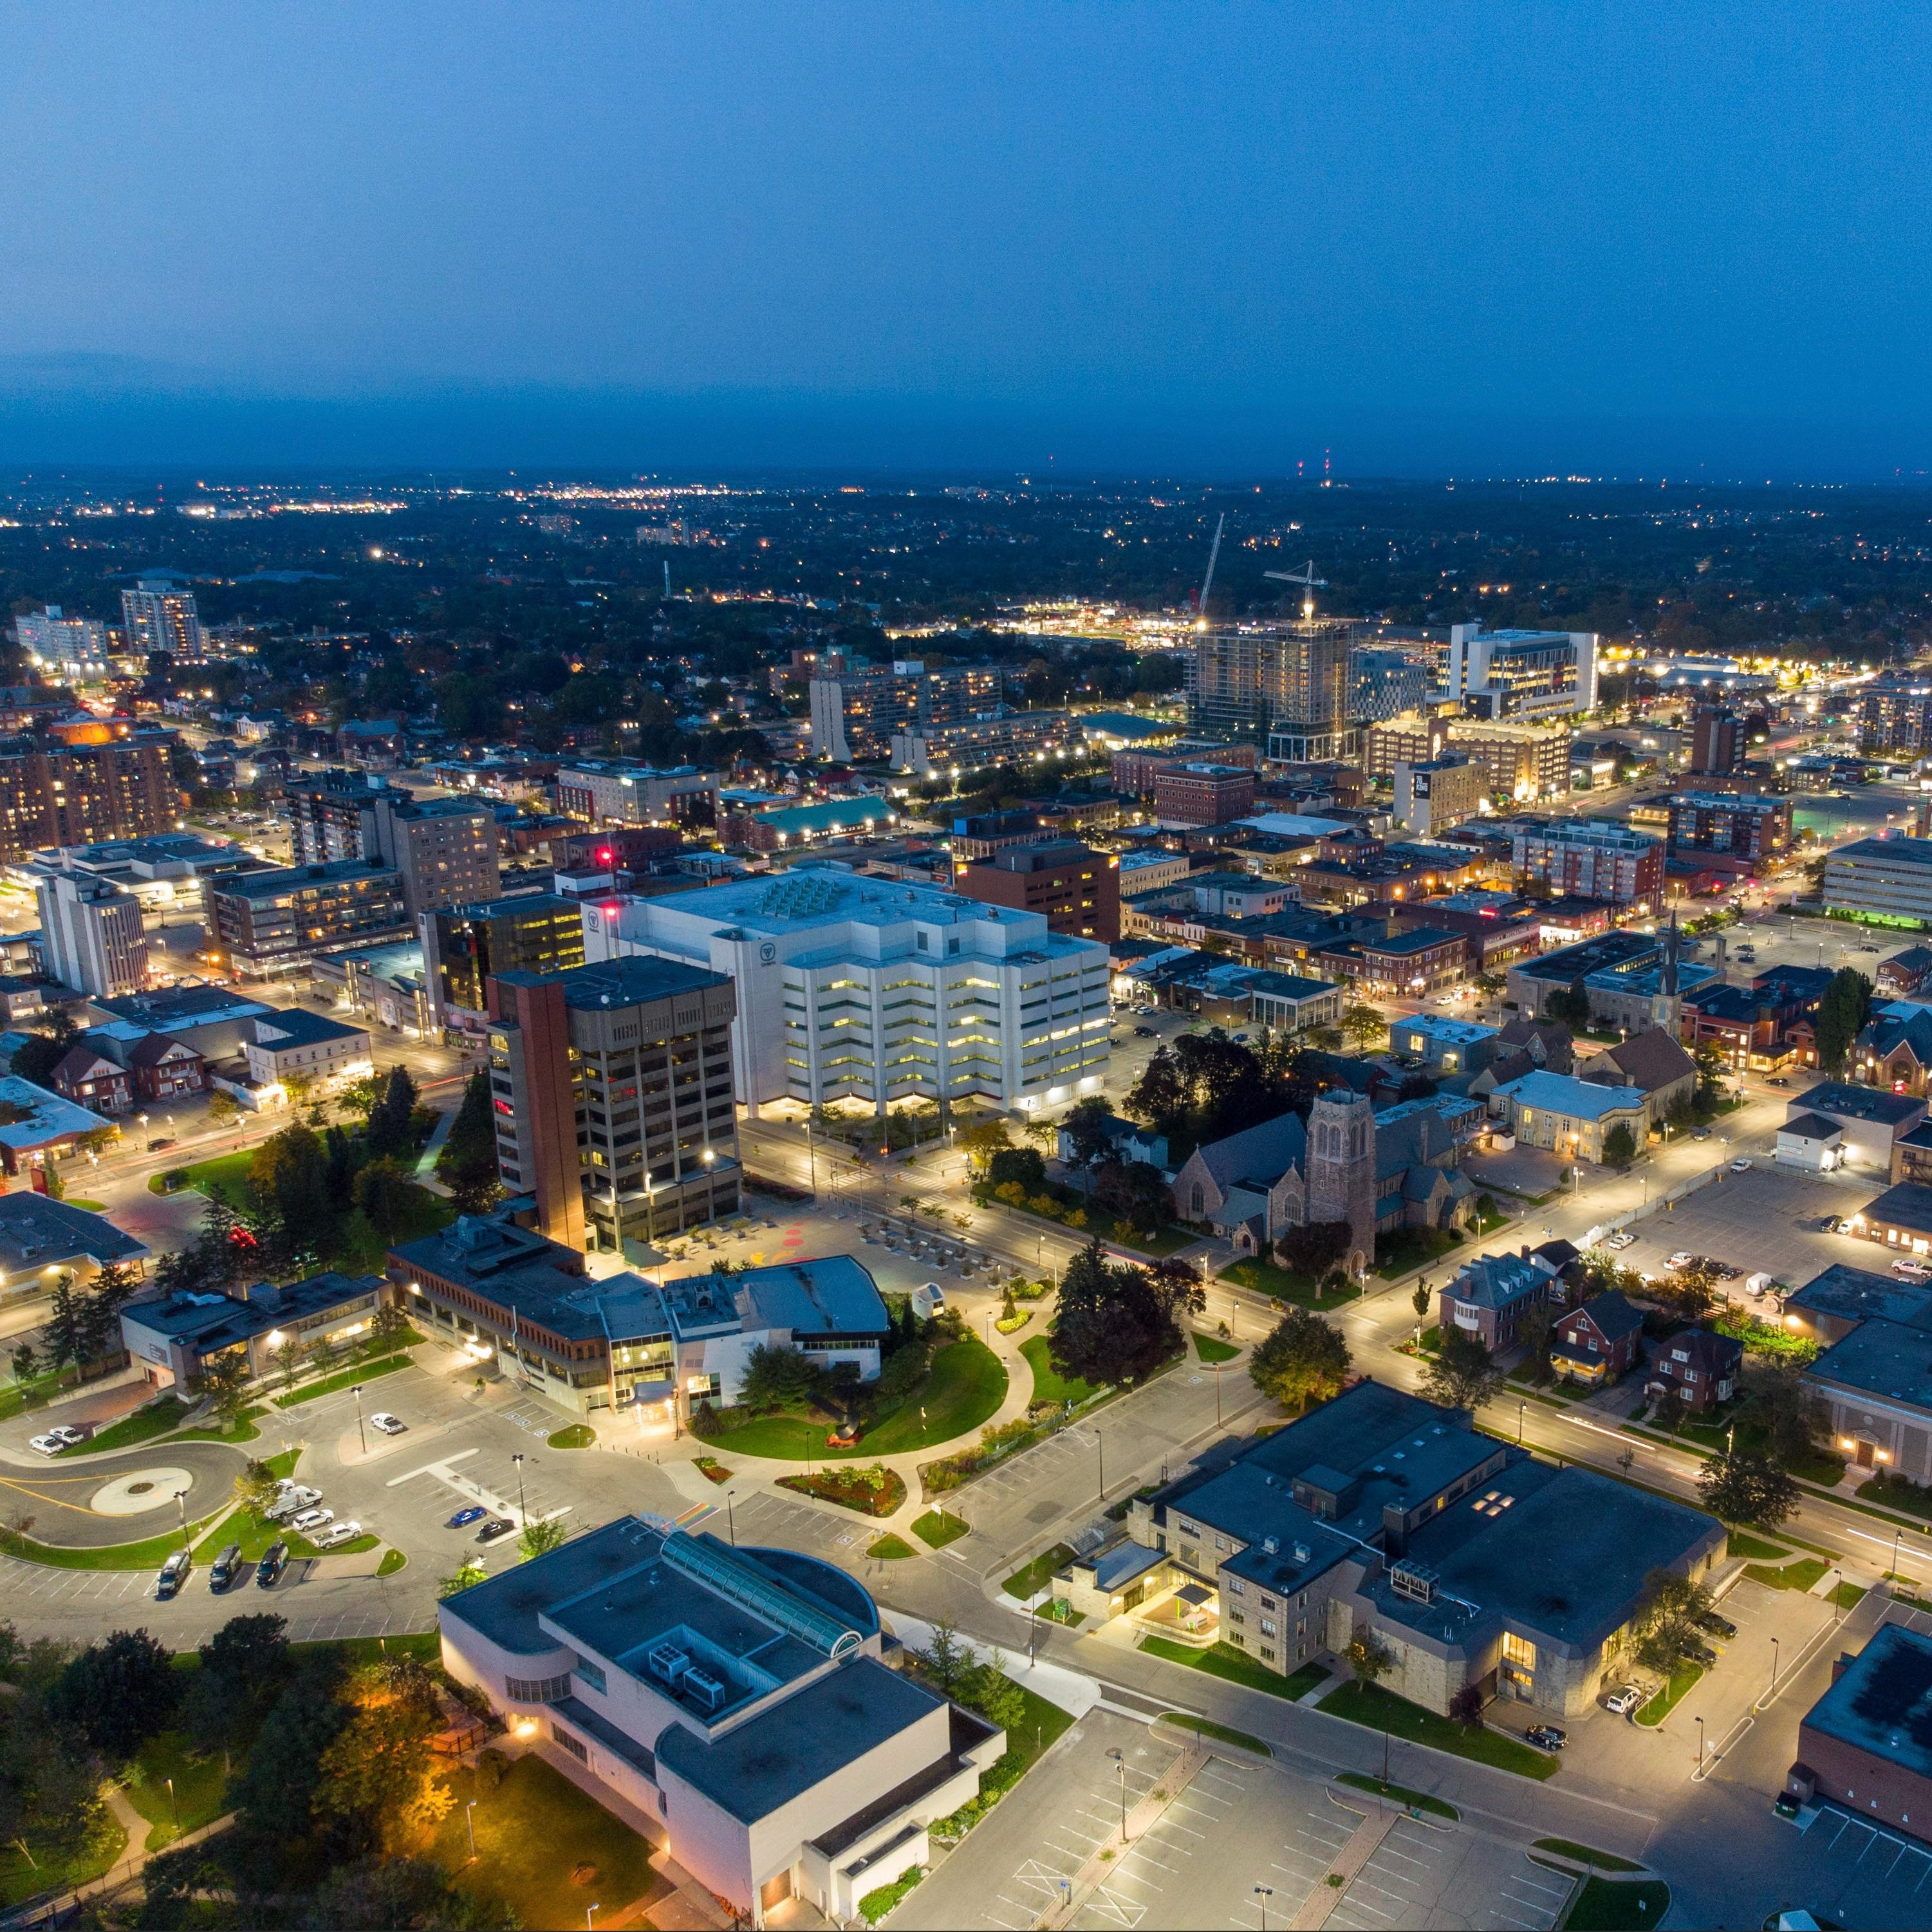 Image of downtown oshawa from above at night. Street lights illuminate the streets, with residential and office buildings in the background.